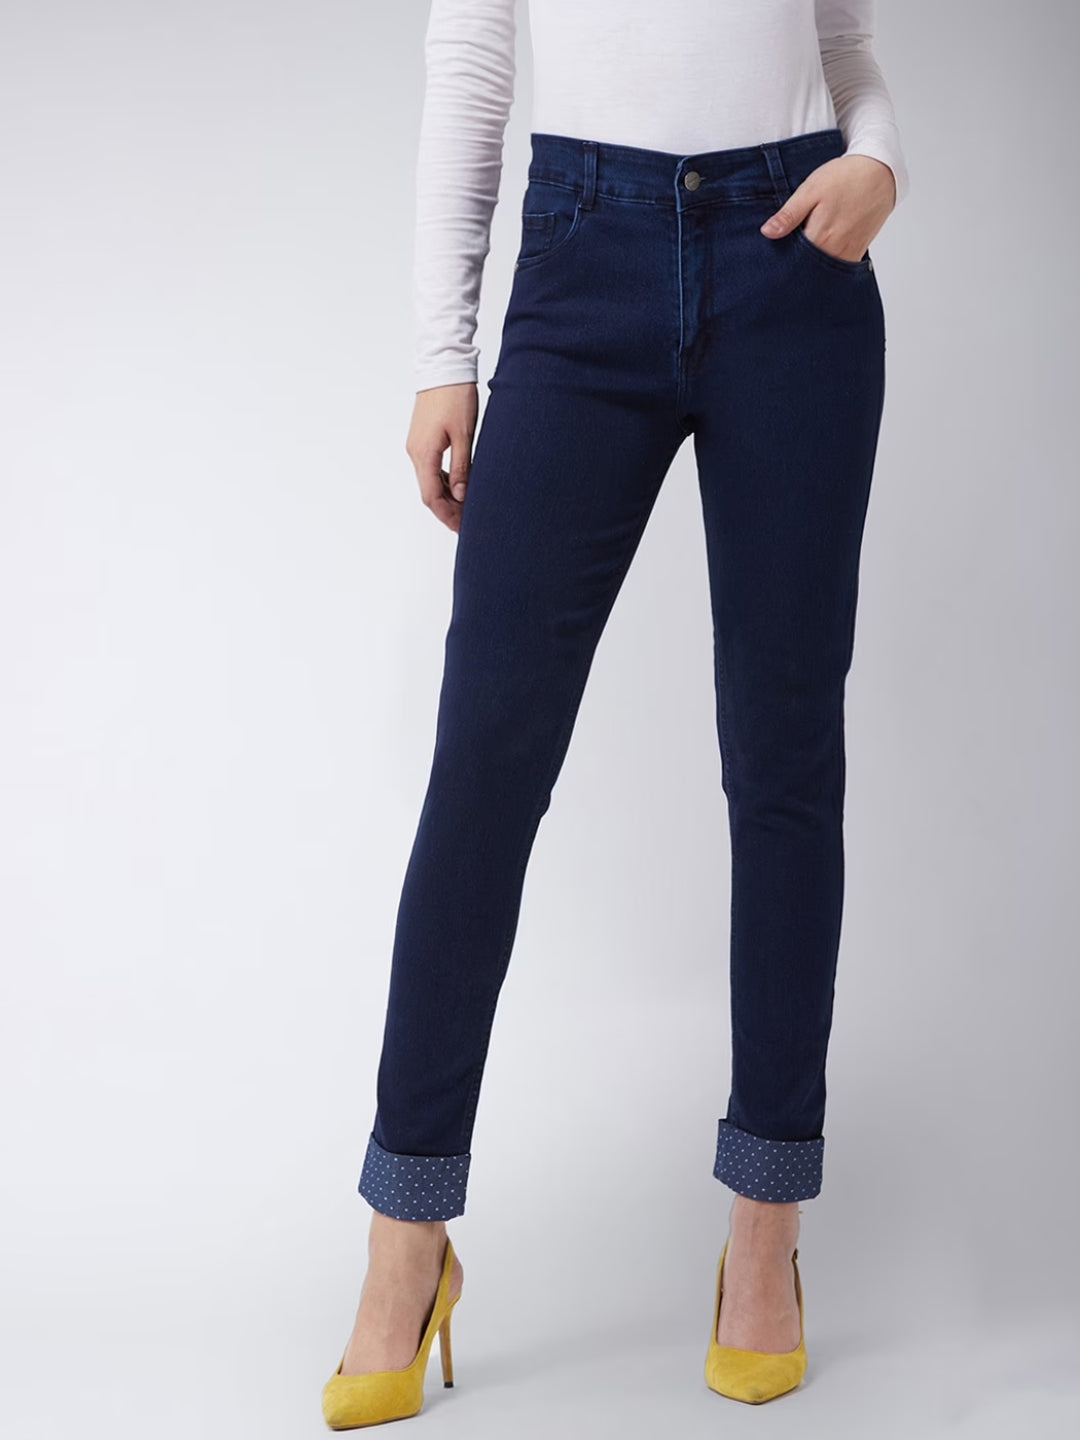 MISS CHASE | Navy Blue Skinny Fit Mid Rise Cropped Printed Turner Detailing Length Denim Stretchable Jeans